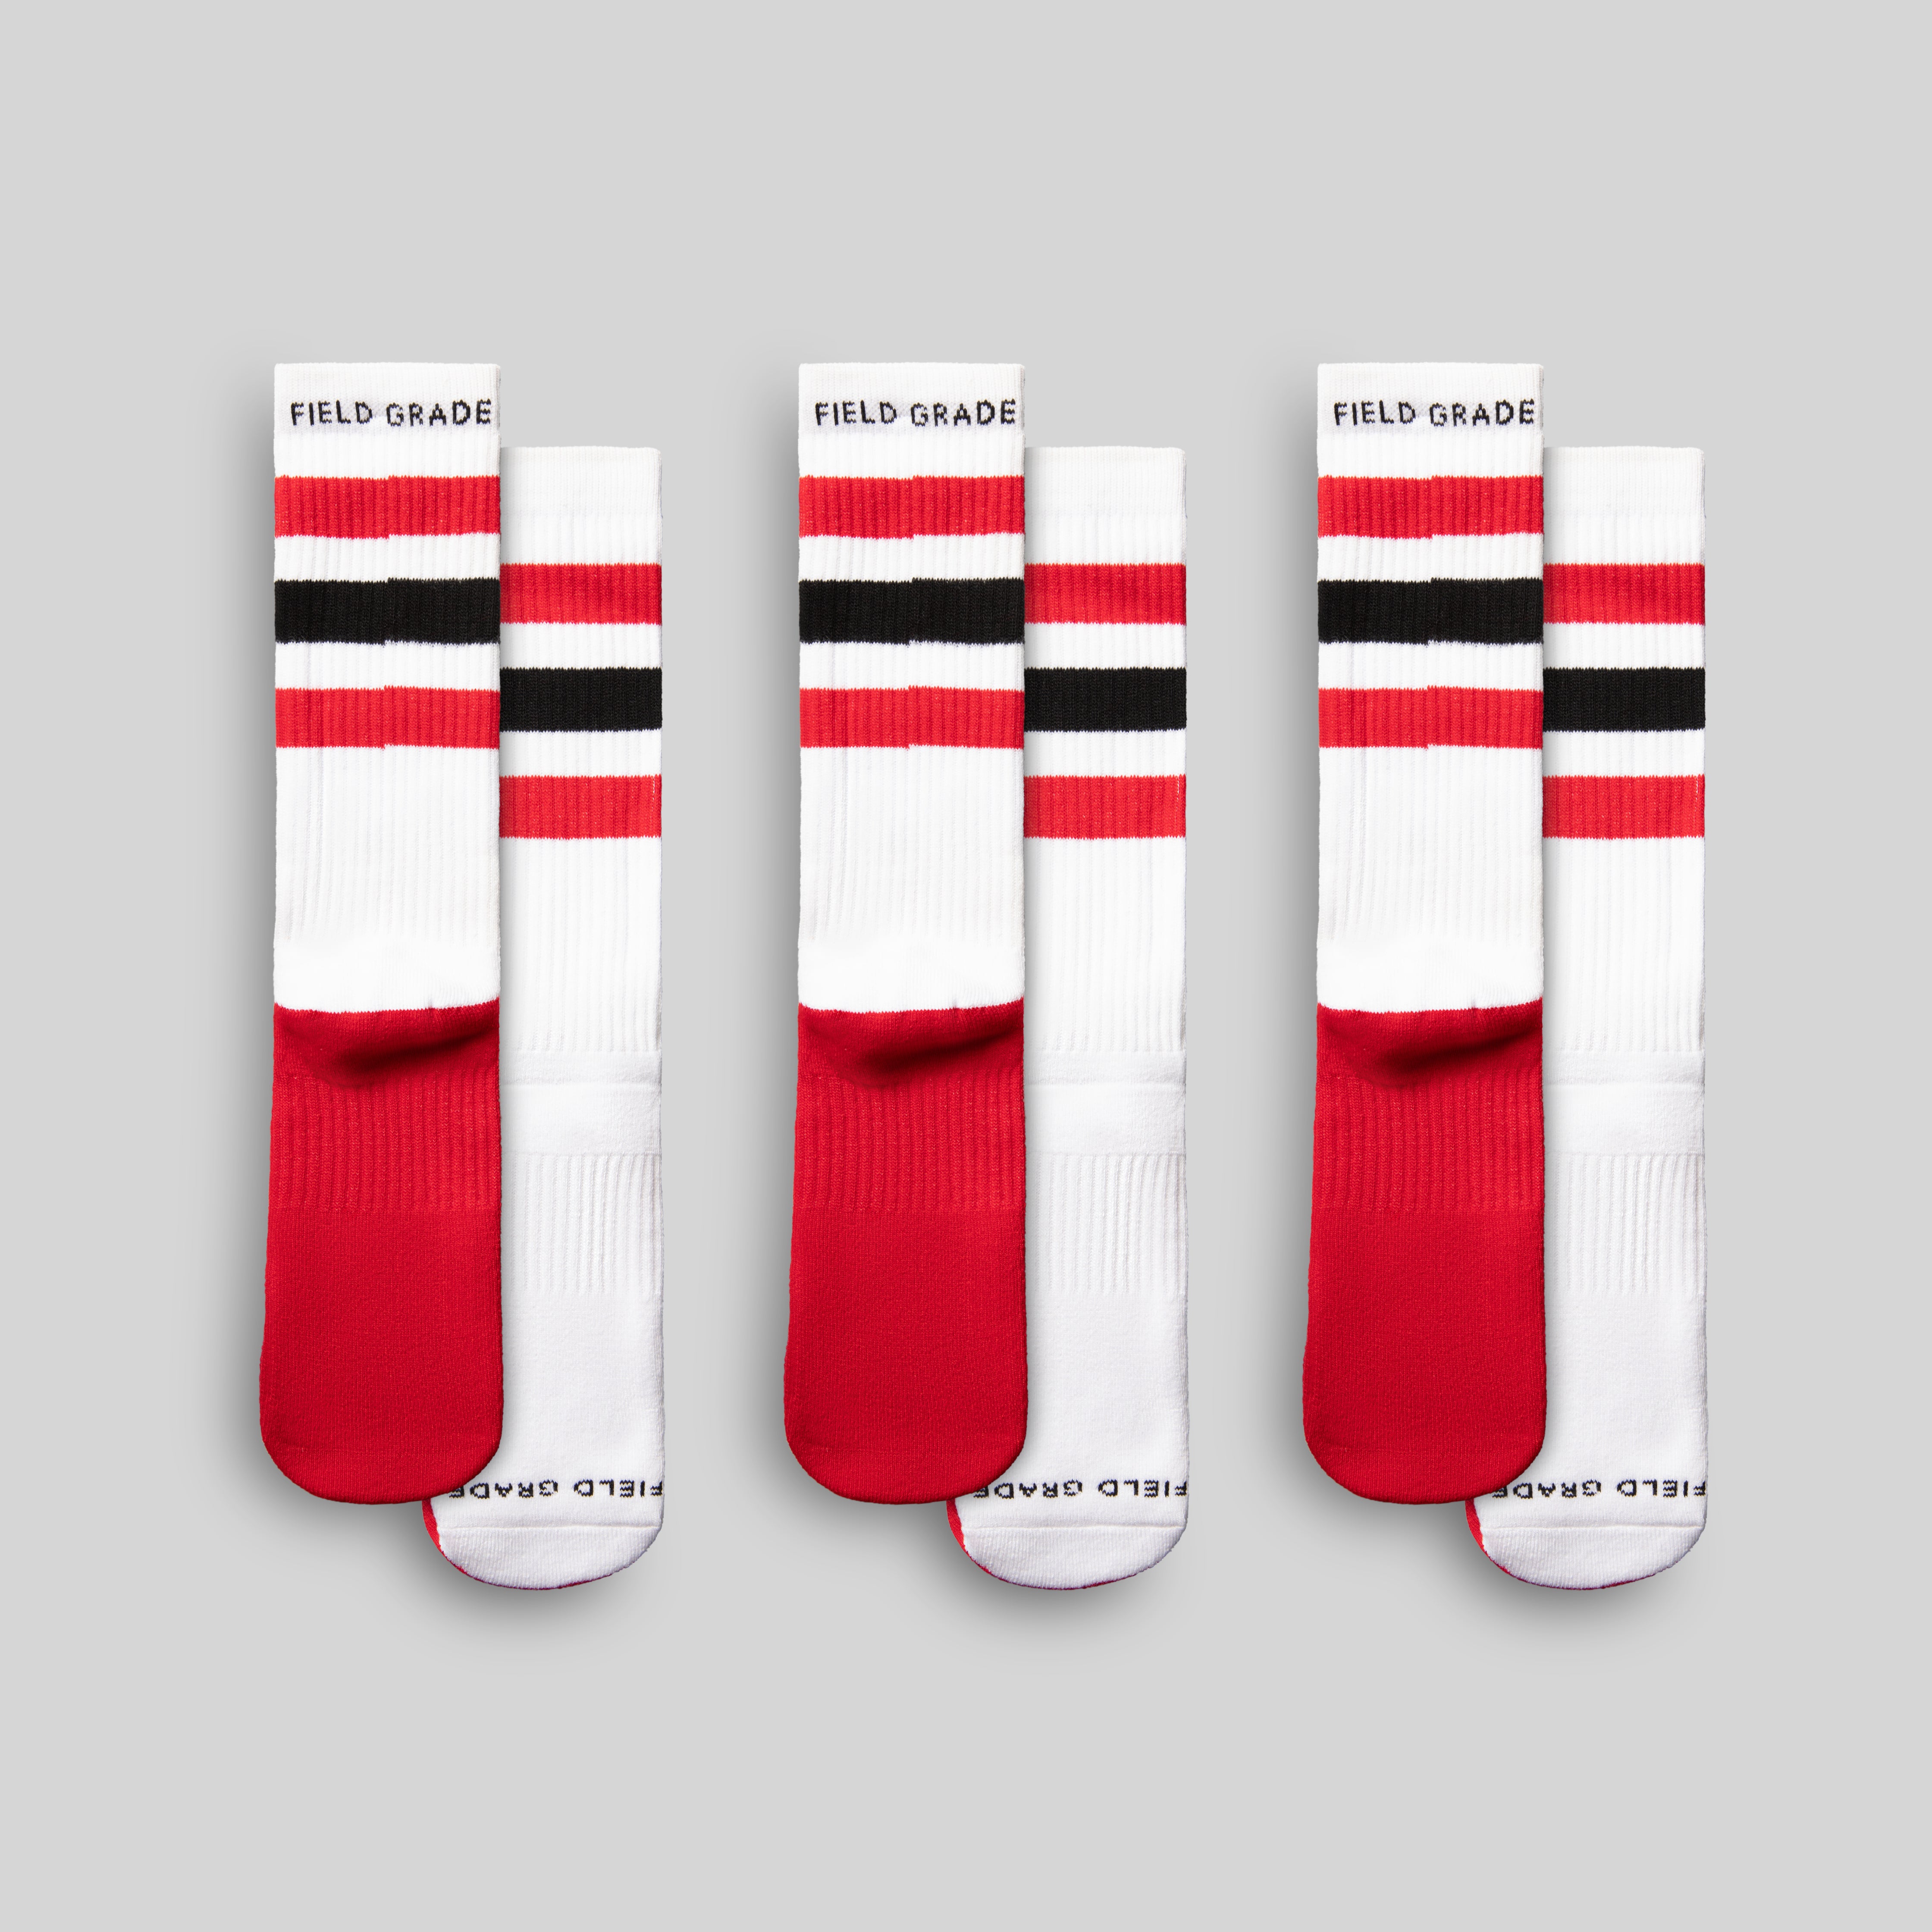 FIELD GRADE STRIPES RED/BLACK CUSHIONED CREW SOCK 3 PACK